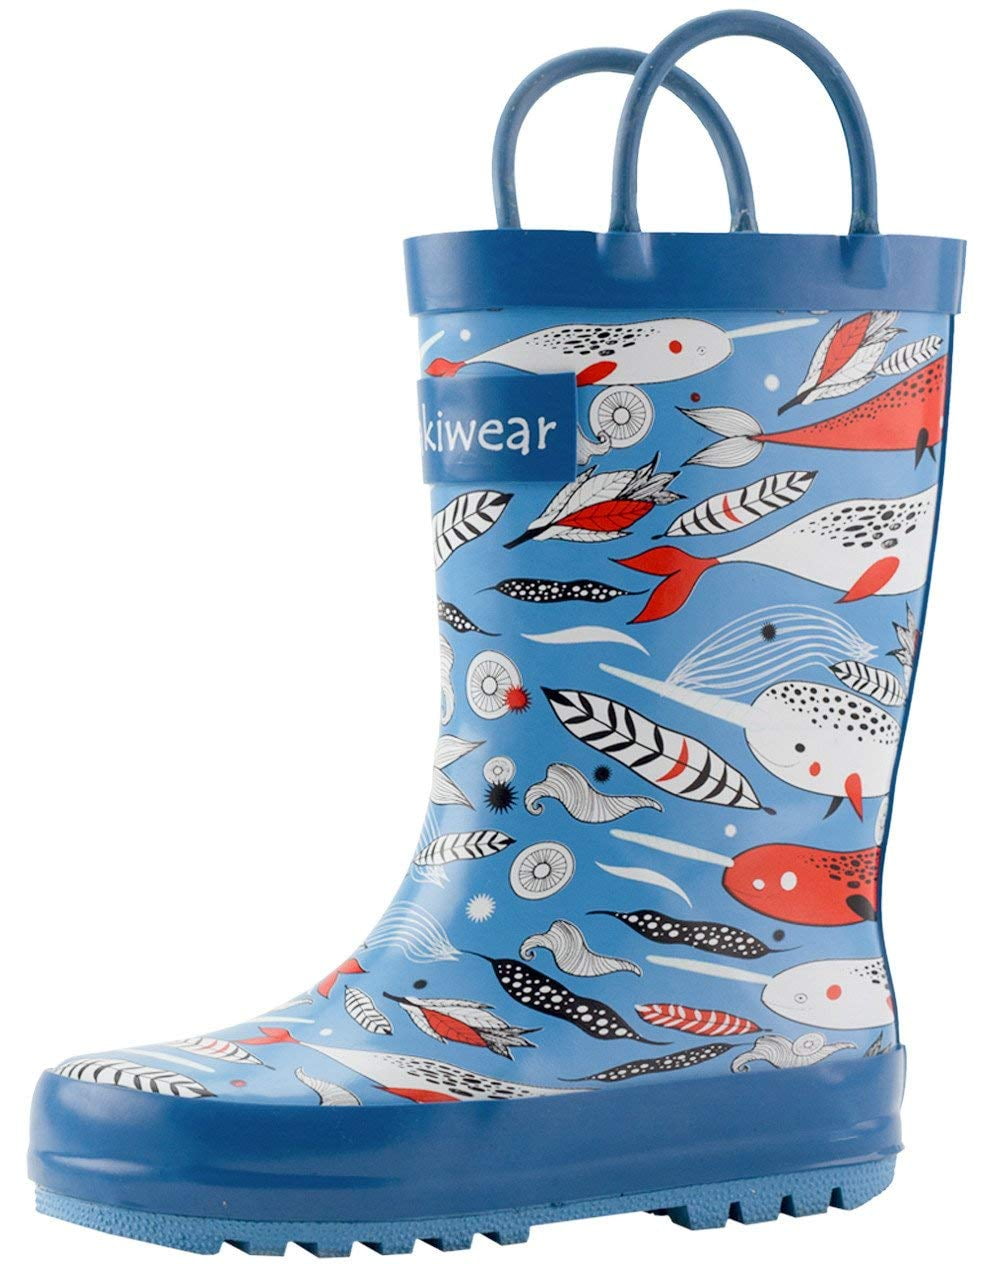 7T US Toddler Blue Dino OAKI Kids Rubber Rain Boots with Easy-On Handles